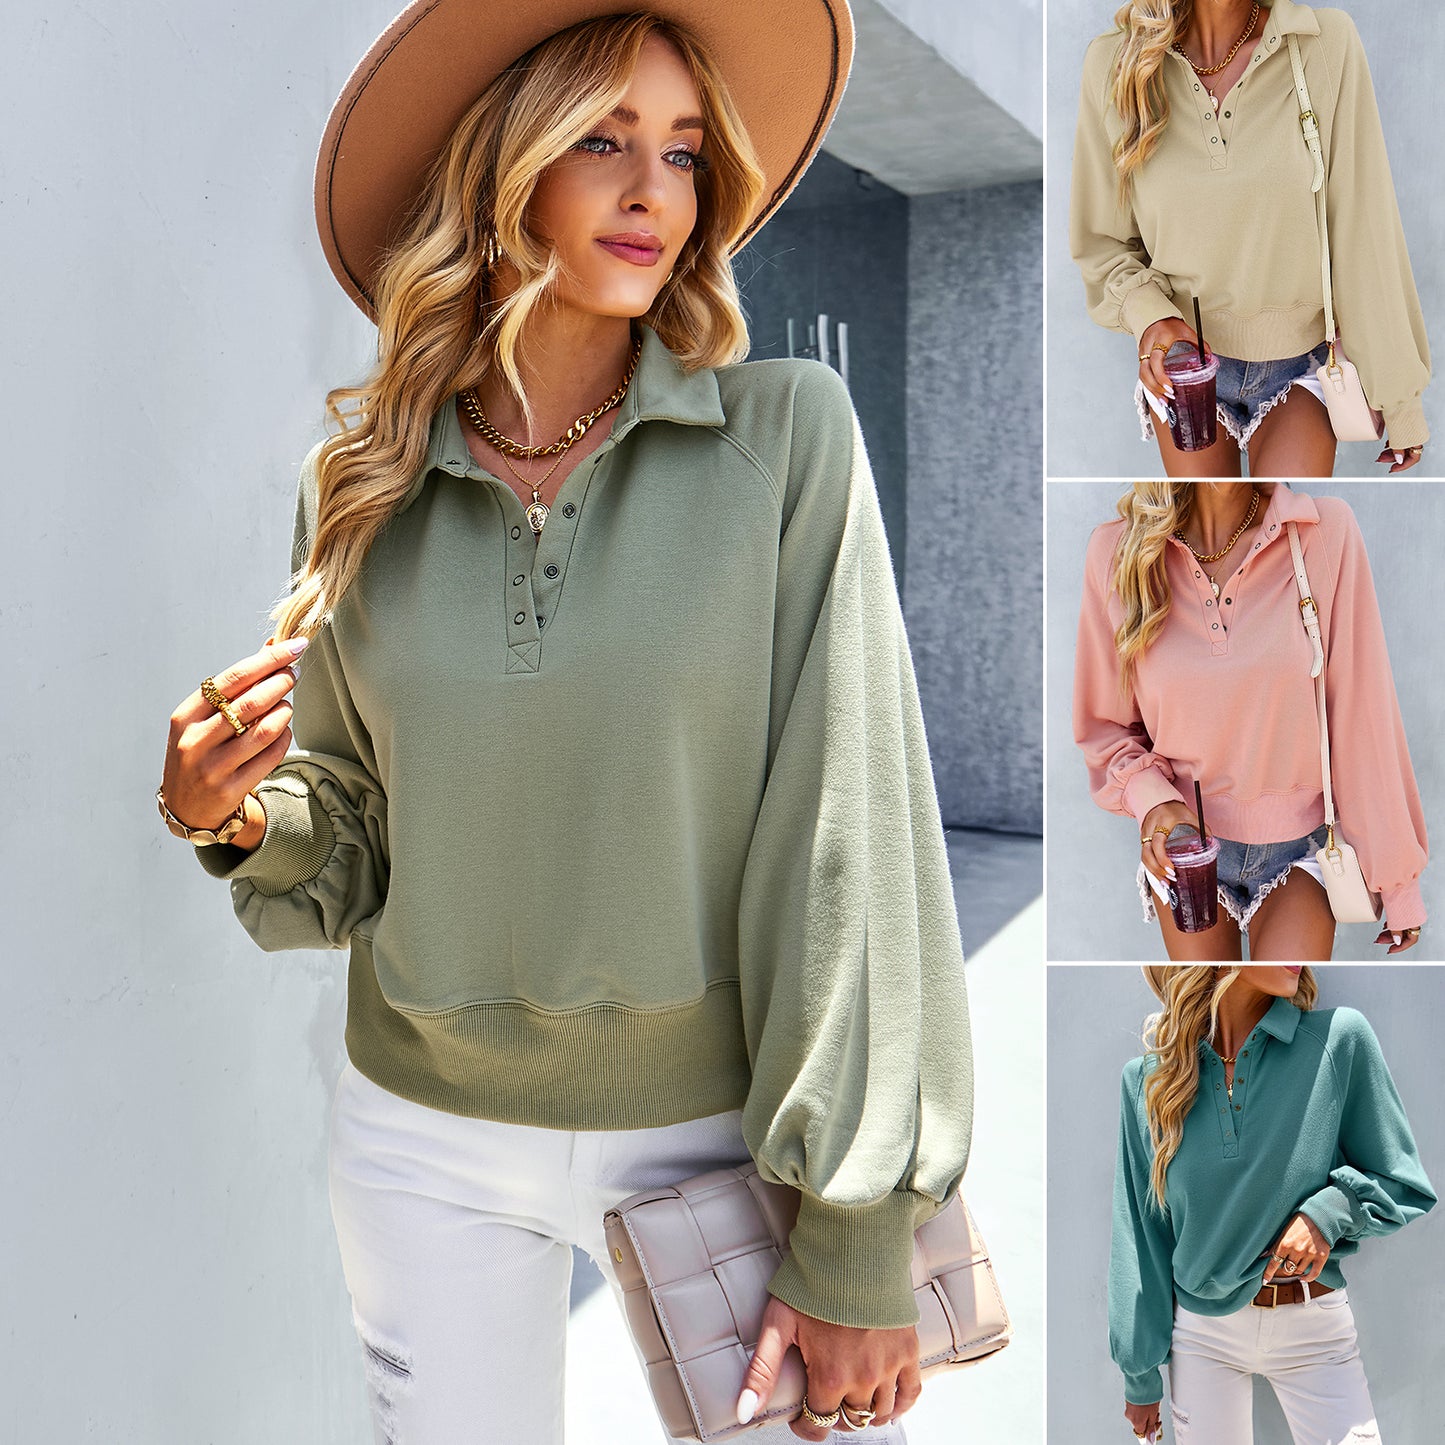 Women's Fashion Casual Solid Color Long-sleeved Sweater